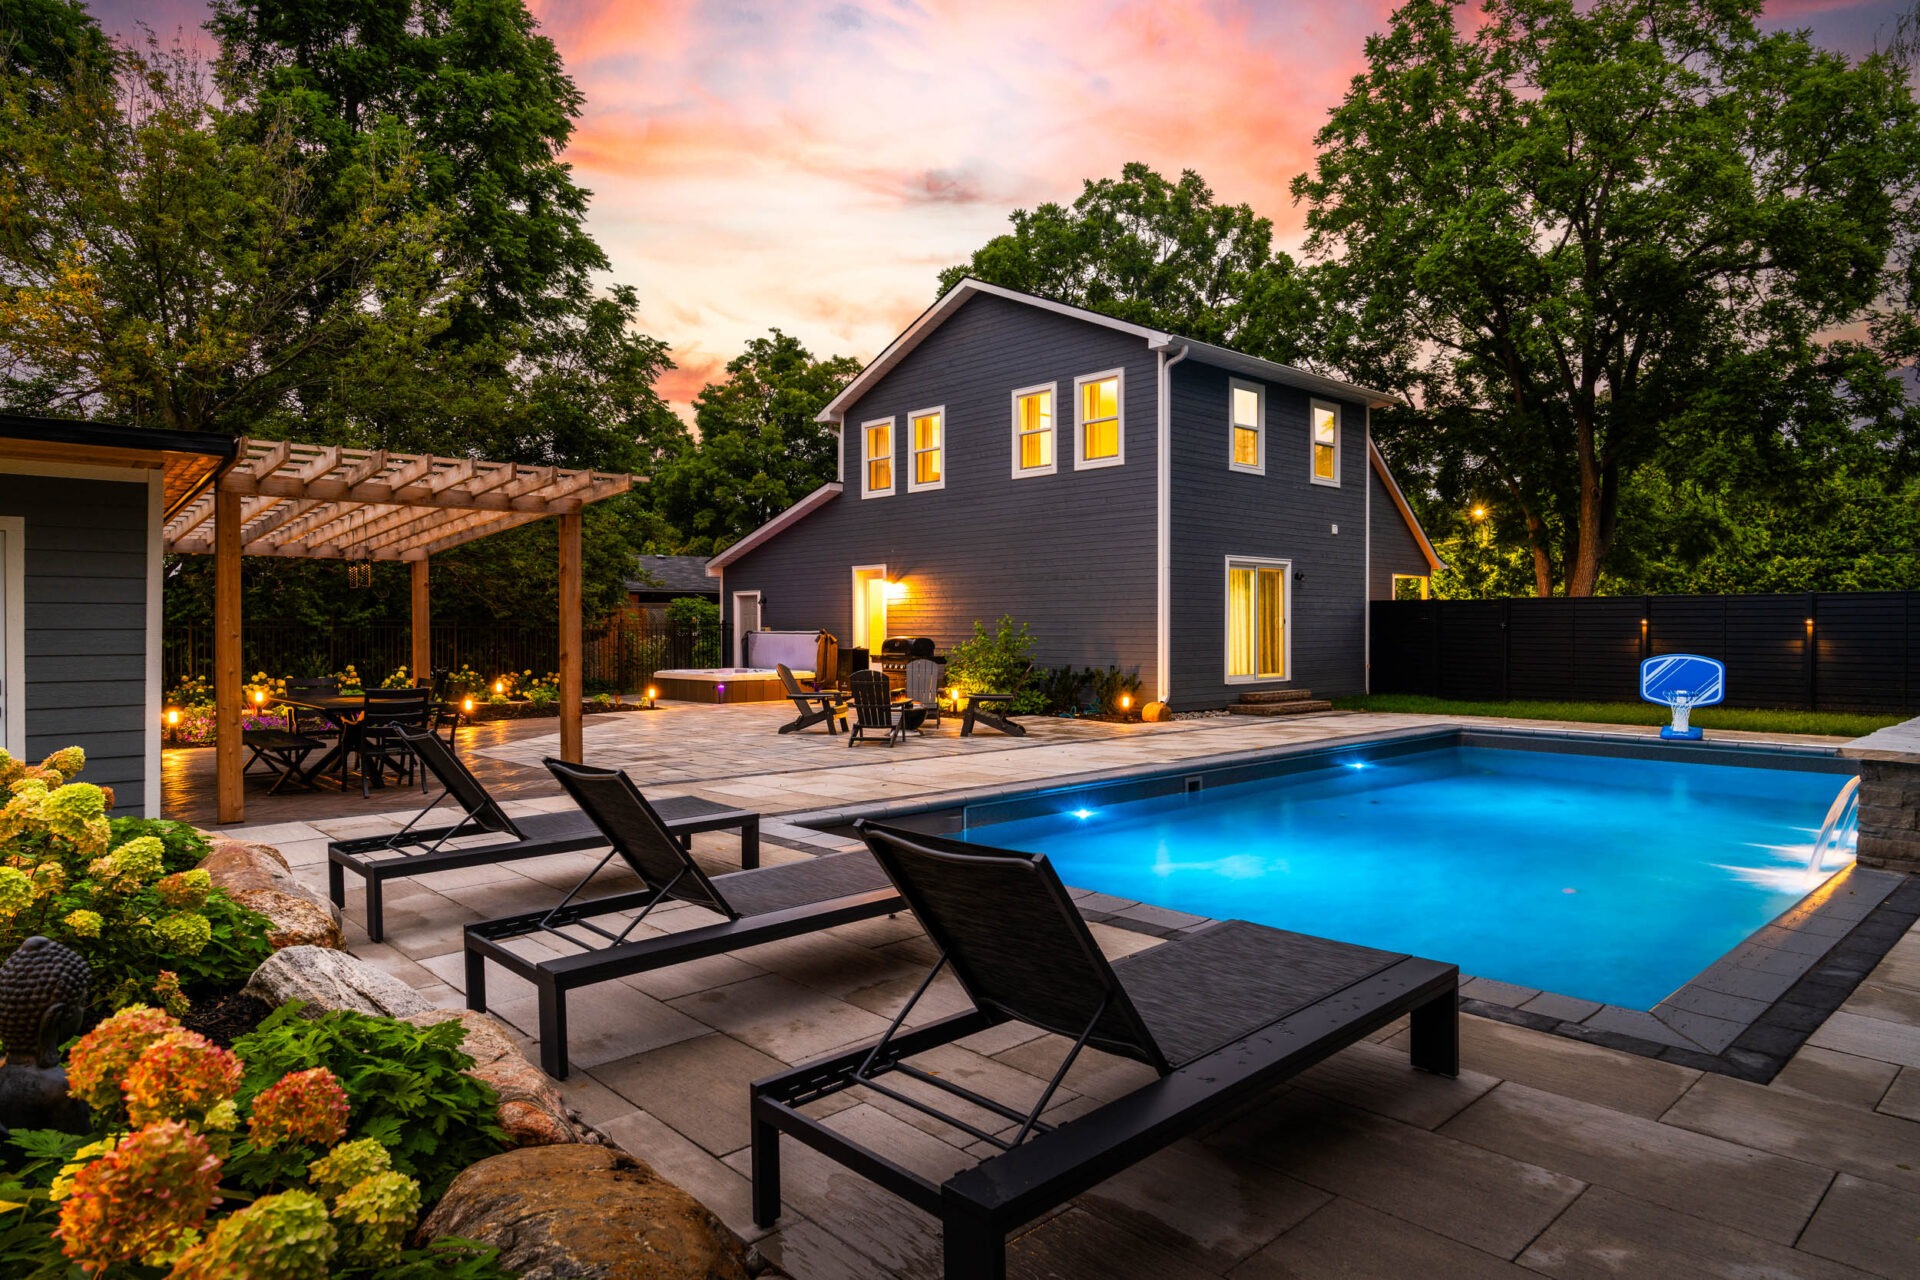 A backyard at dusk featuring a modern two-story house with a swimming pool, lounge chairs, pergola dining area, and ambient lighting under a sunset sky.